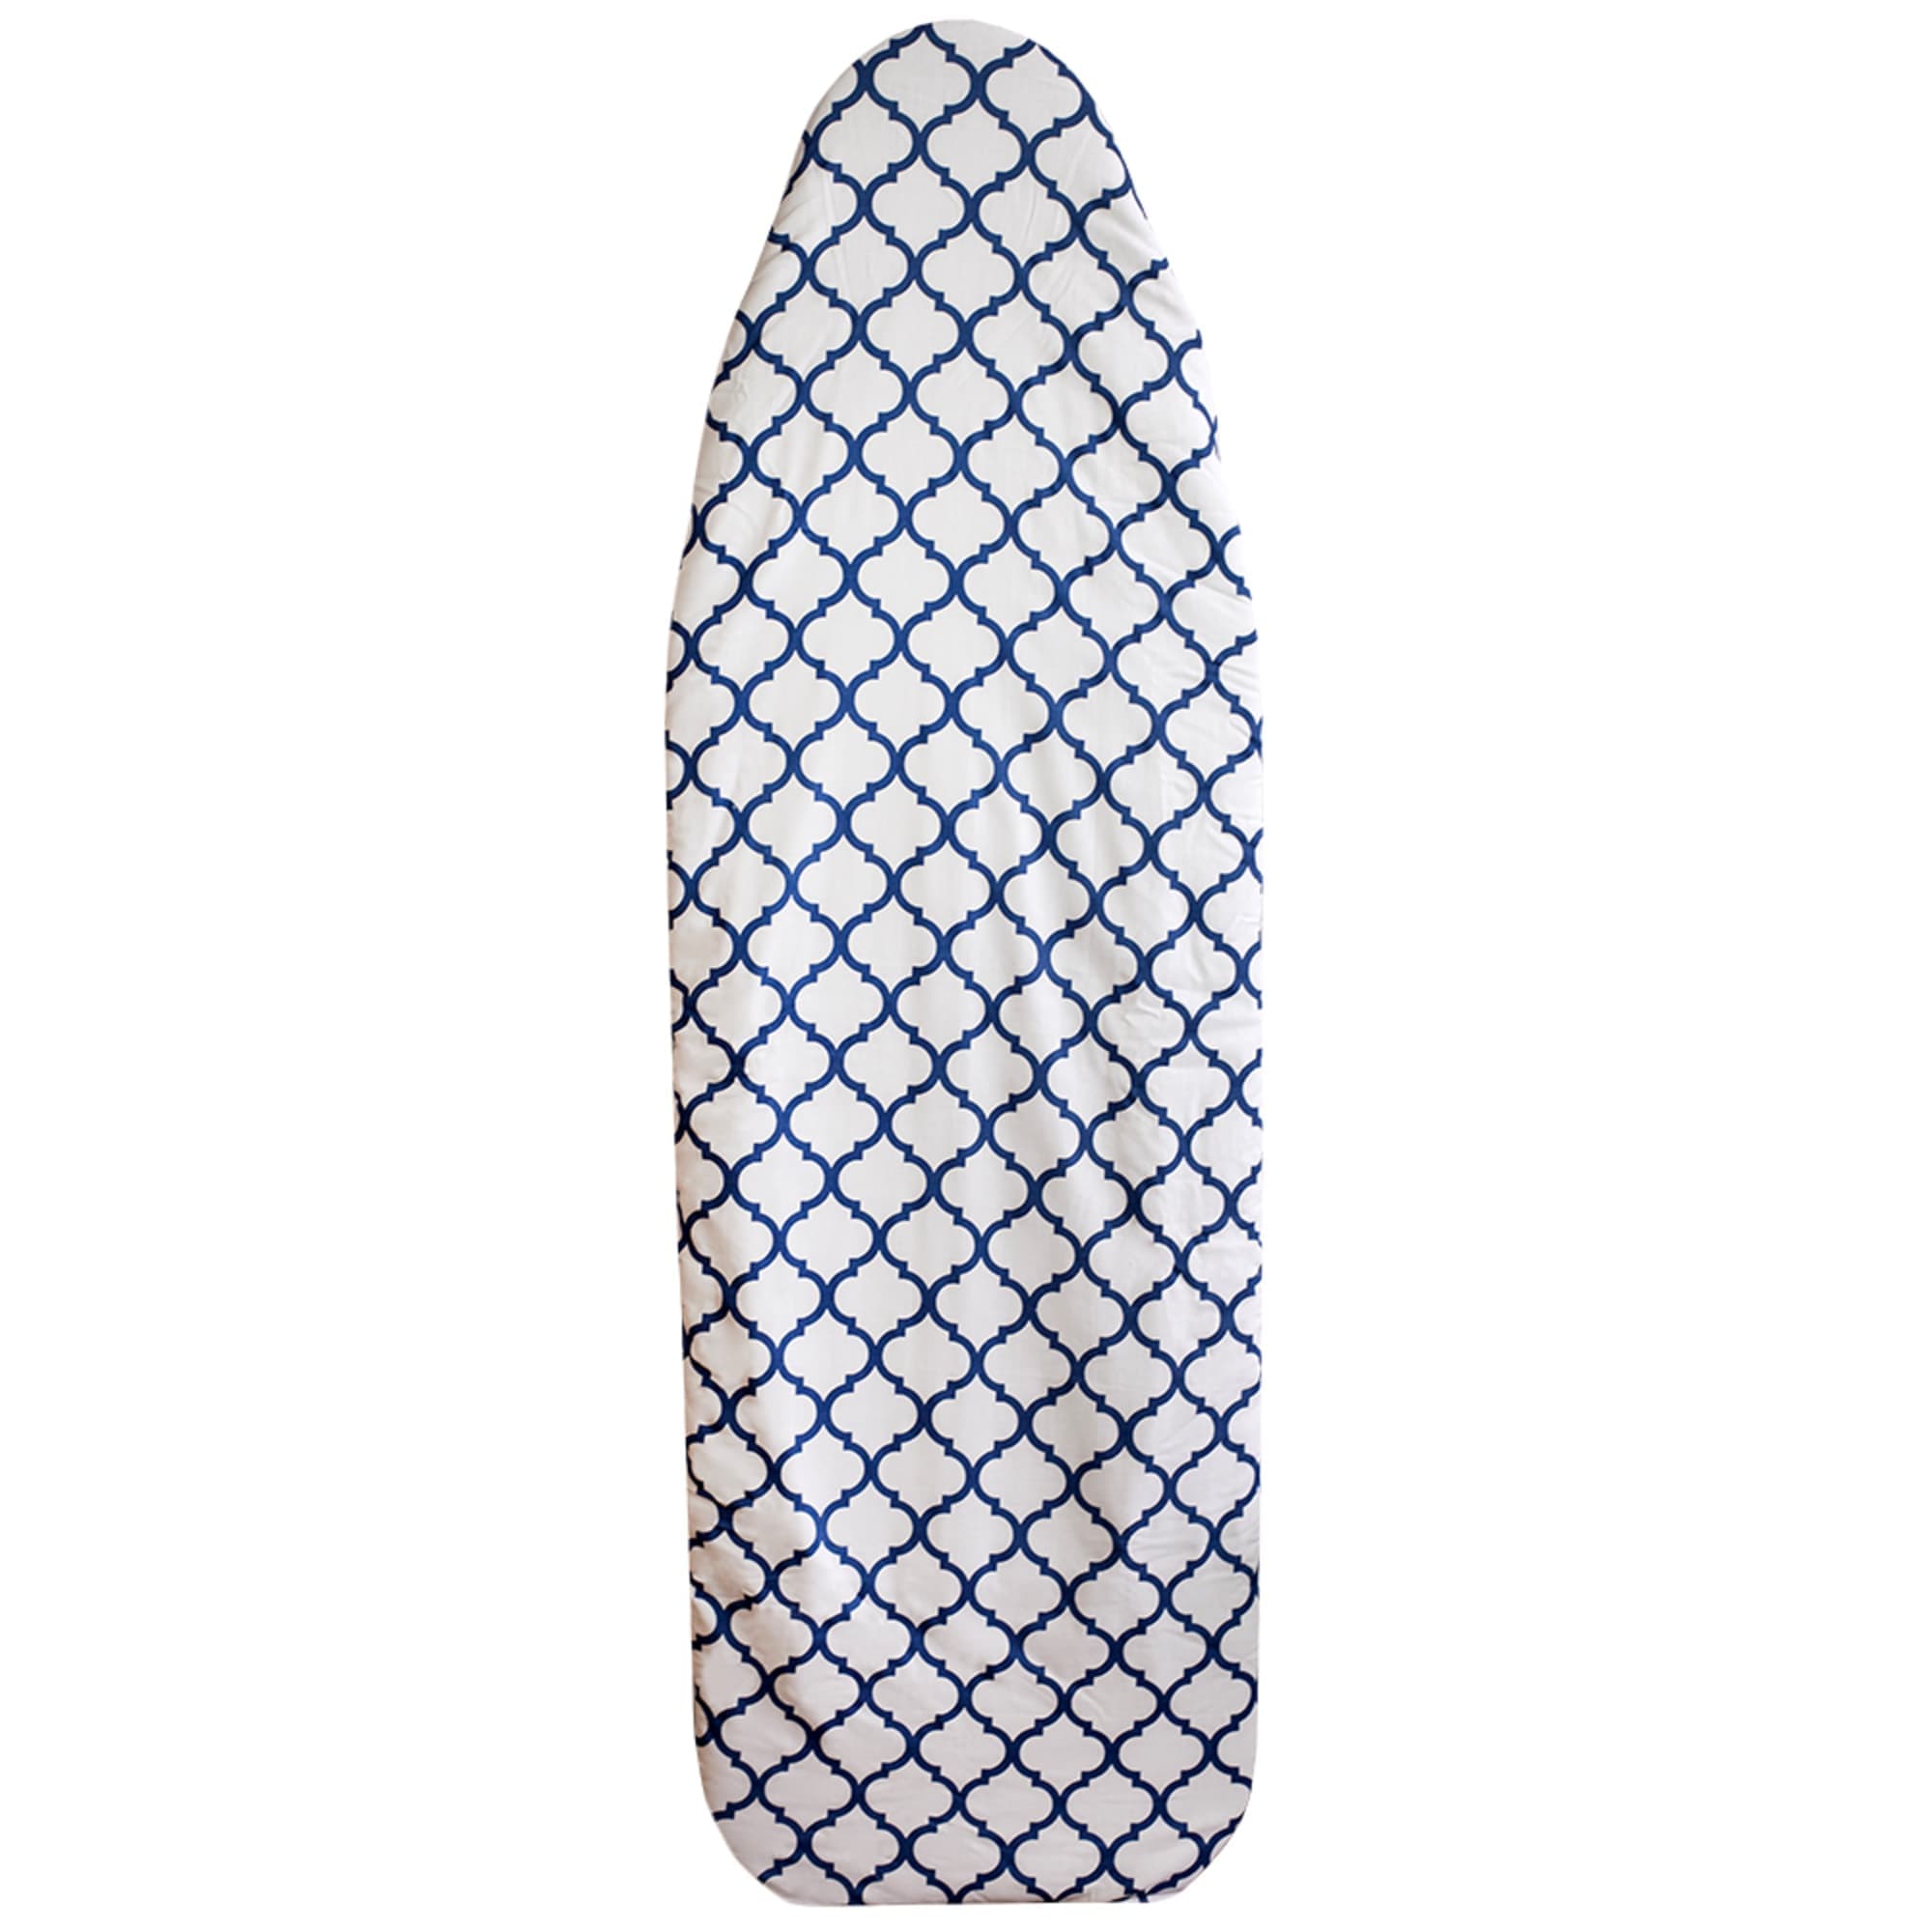 Home Basics Lattice Cotton Ironing Board Cover, Purple $6 EACH, CASE PACK OF 12